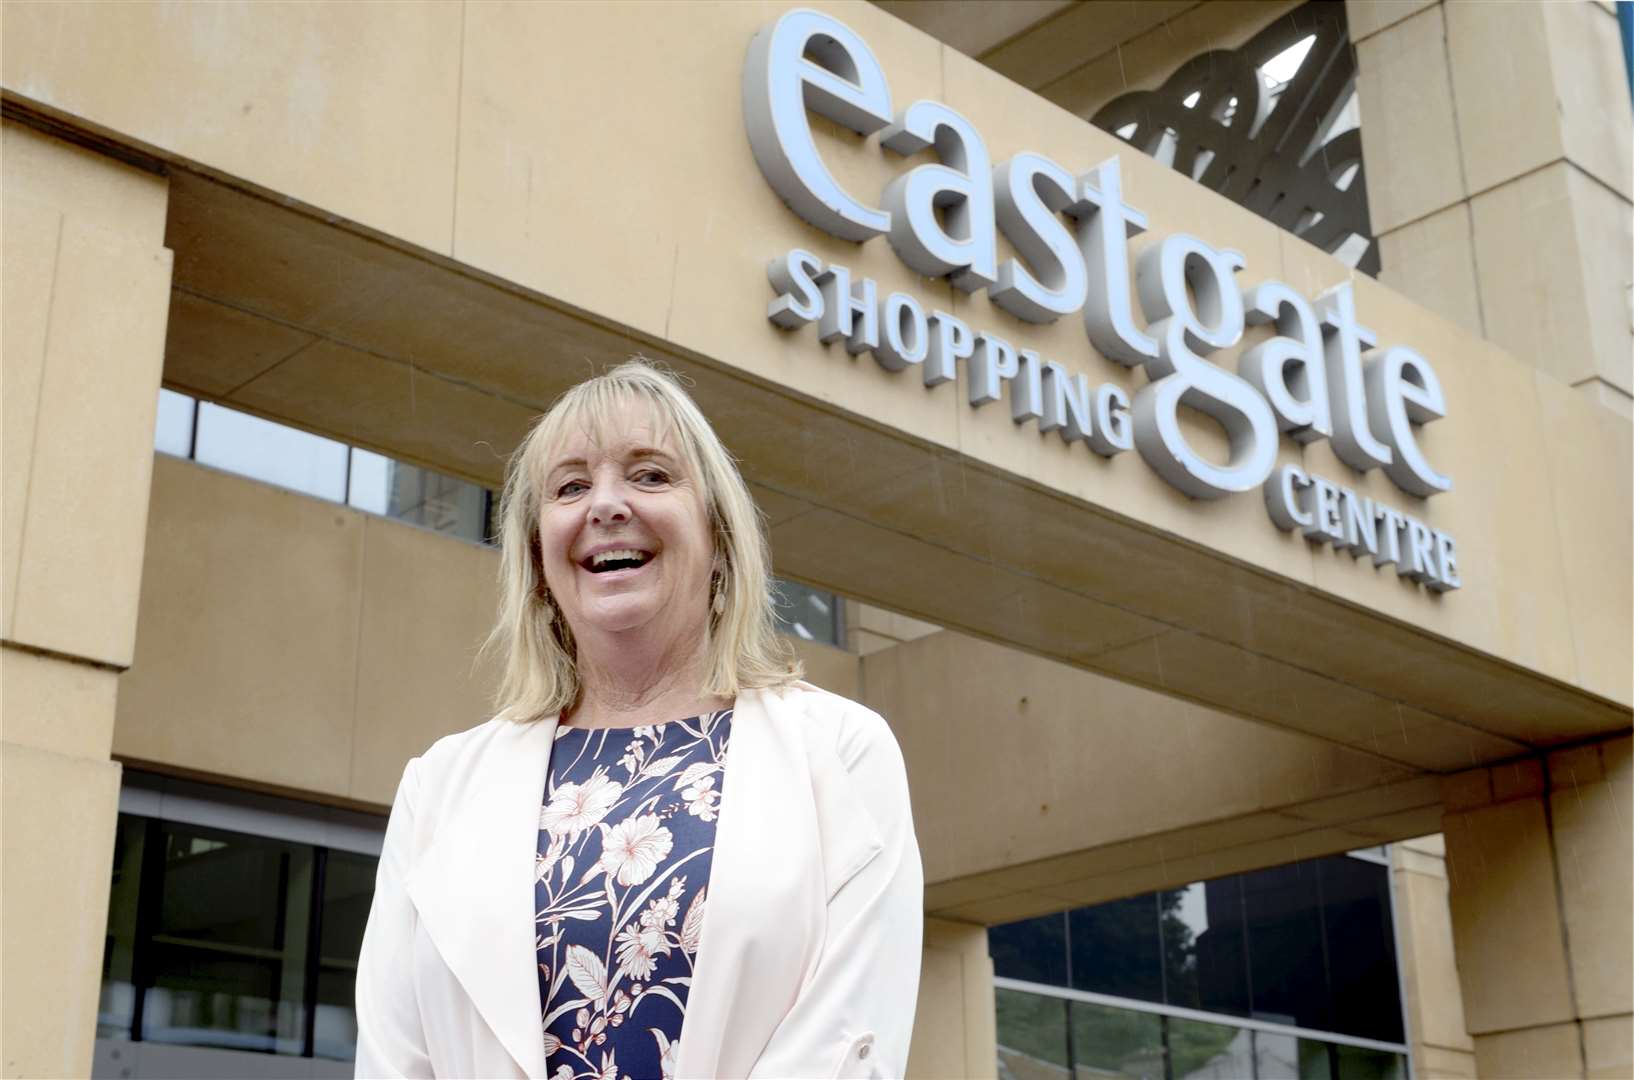 Jackie Cuddy, manager of the Eastgate Shopping Centre.